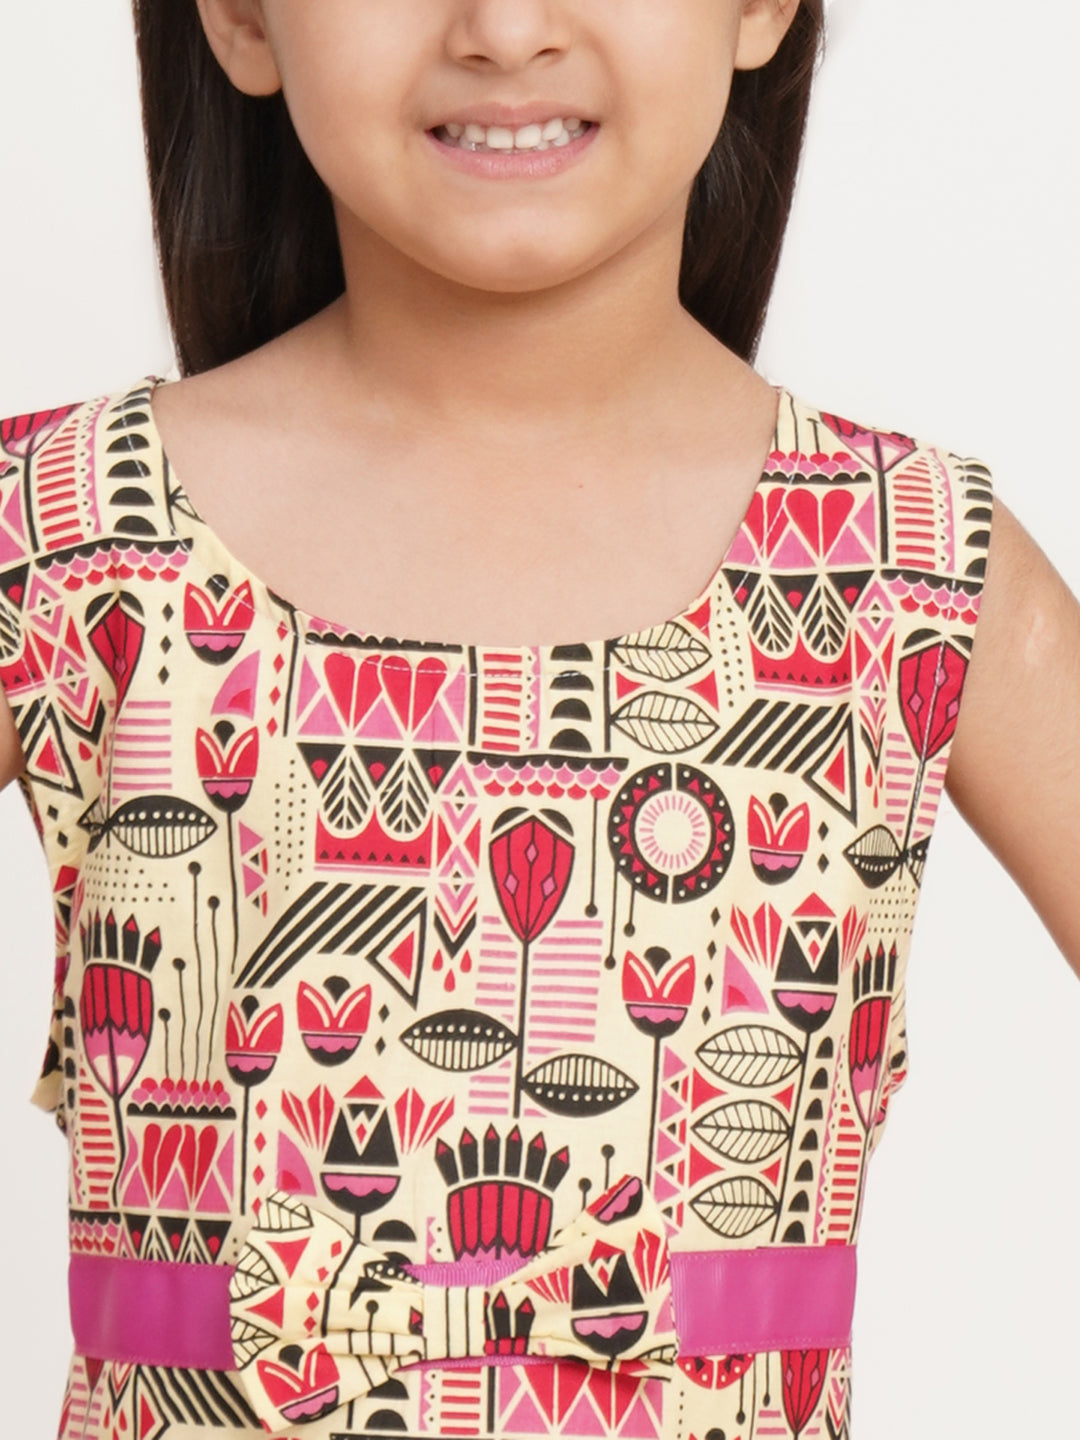 CREATIVE KID'S Girl Pink & Red Printed Cotton A-Line Dress